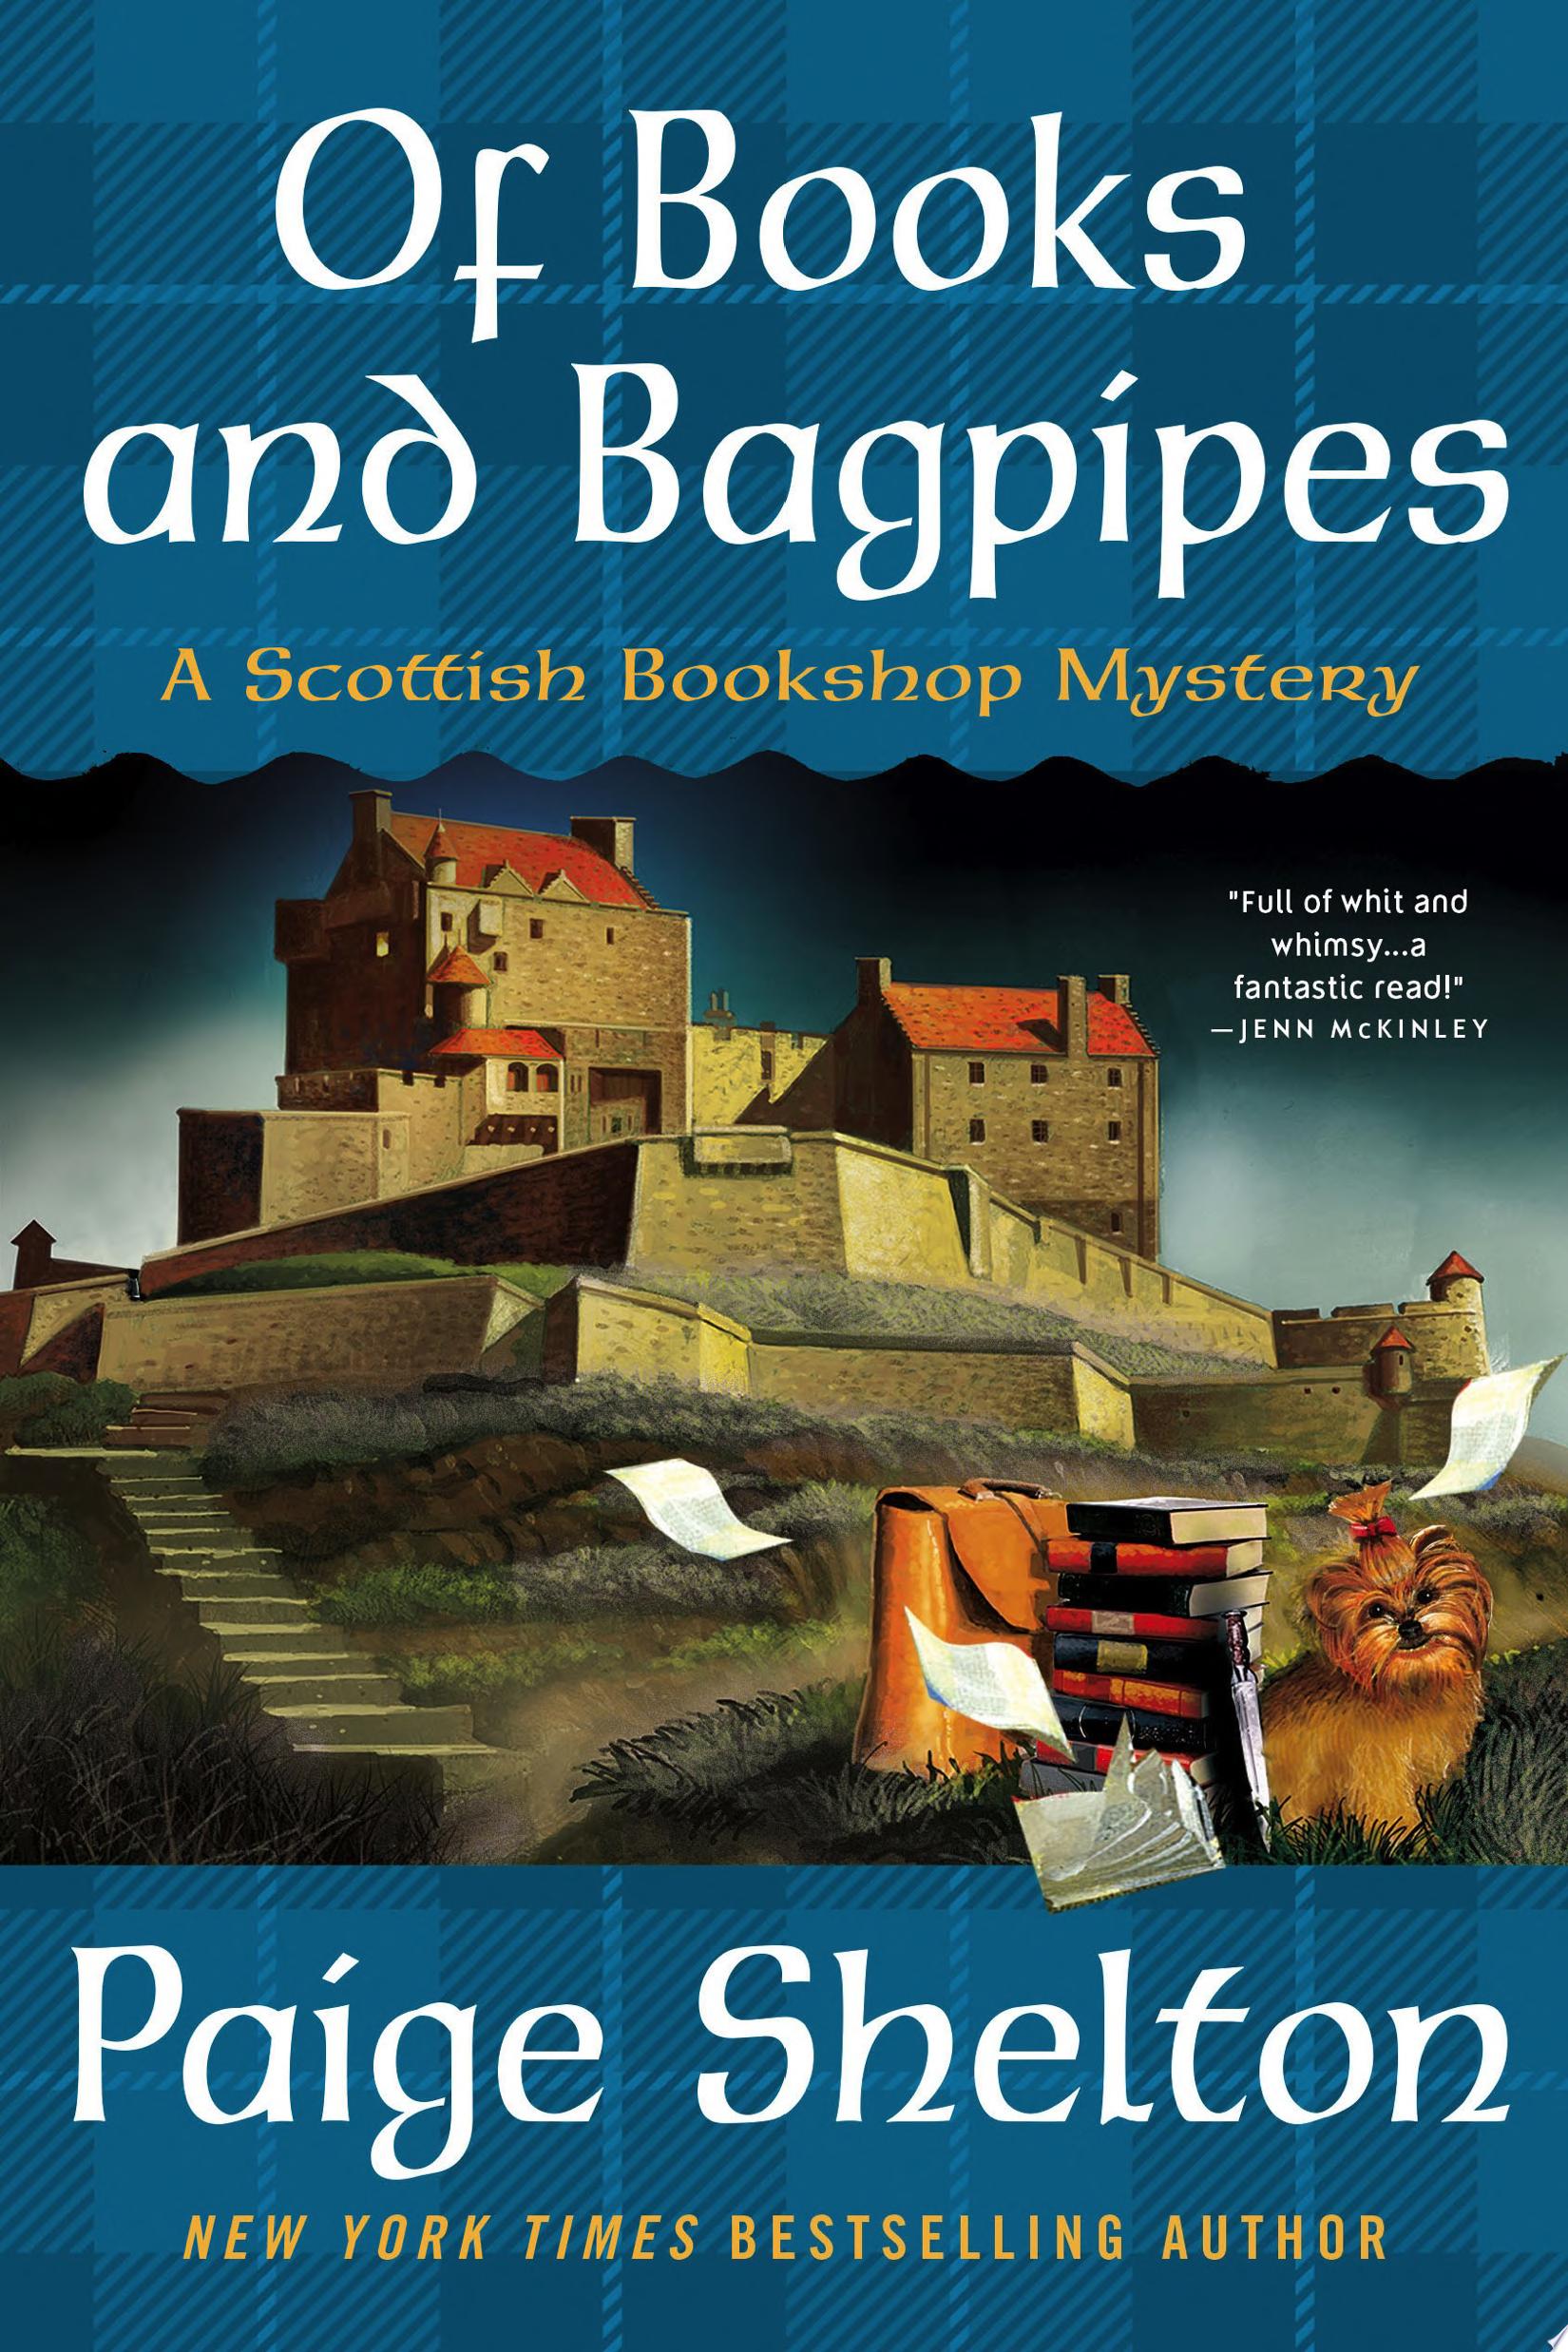 Image for "Of Books and Bagpipes"